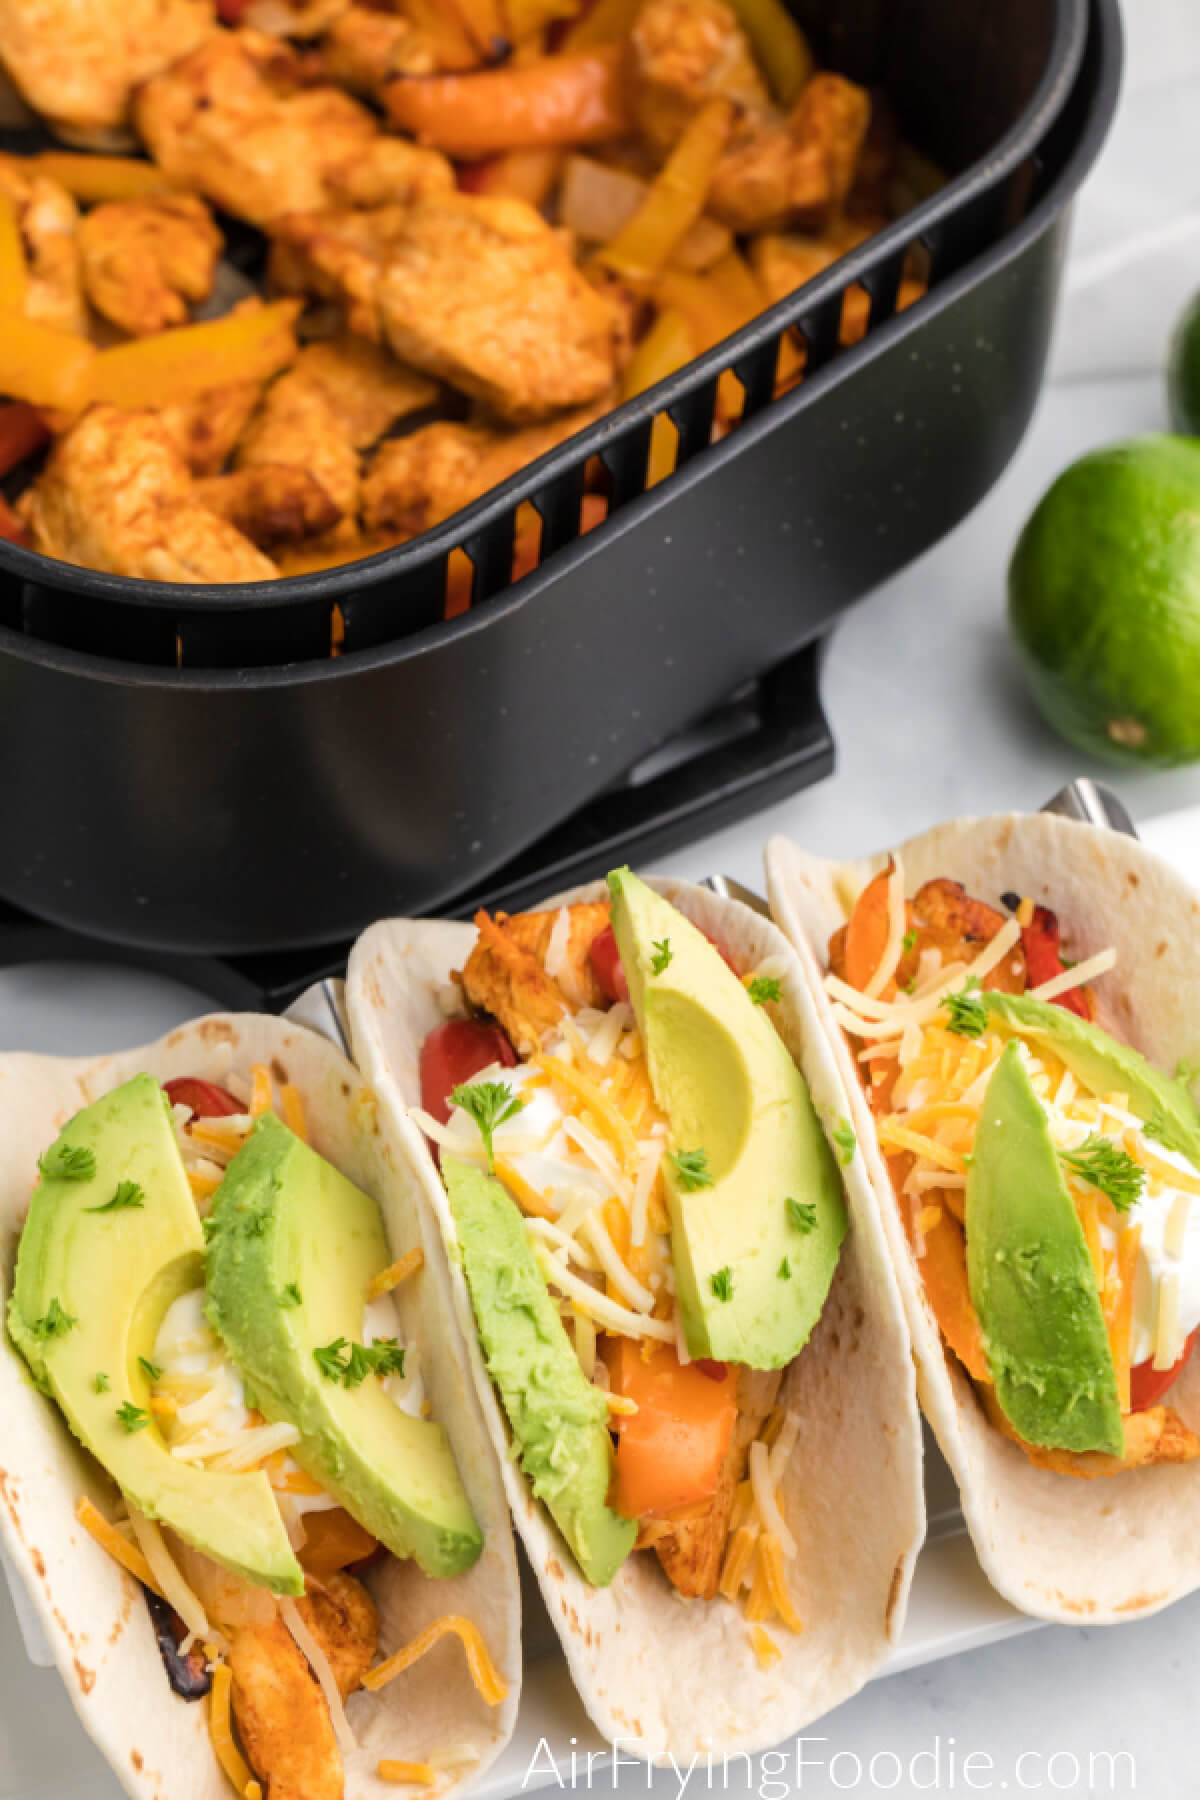 Chicken fajitas served in flour tortillas topped with cheese, avocado slices, and fresh parsley flakes. 